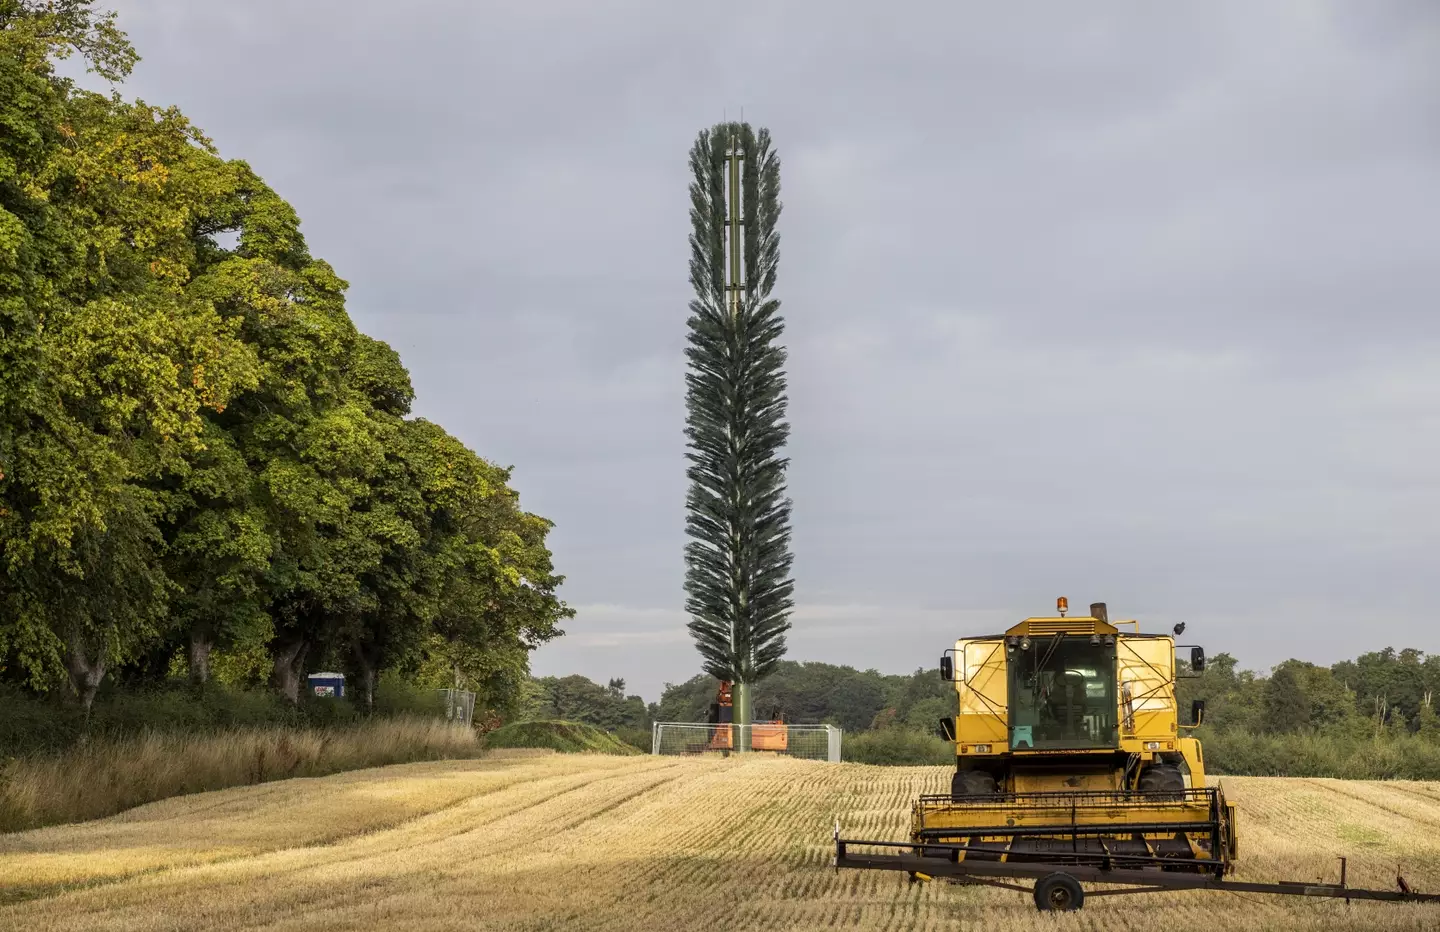 The prickly 'disguised' phone mast sticks out like a sore thumb, to say the least.